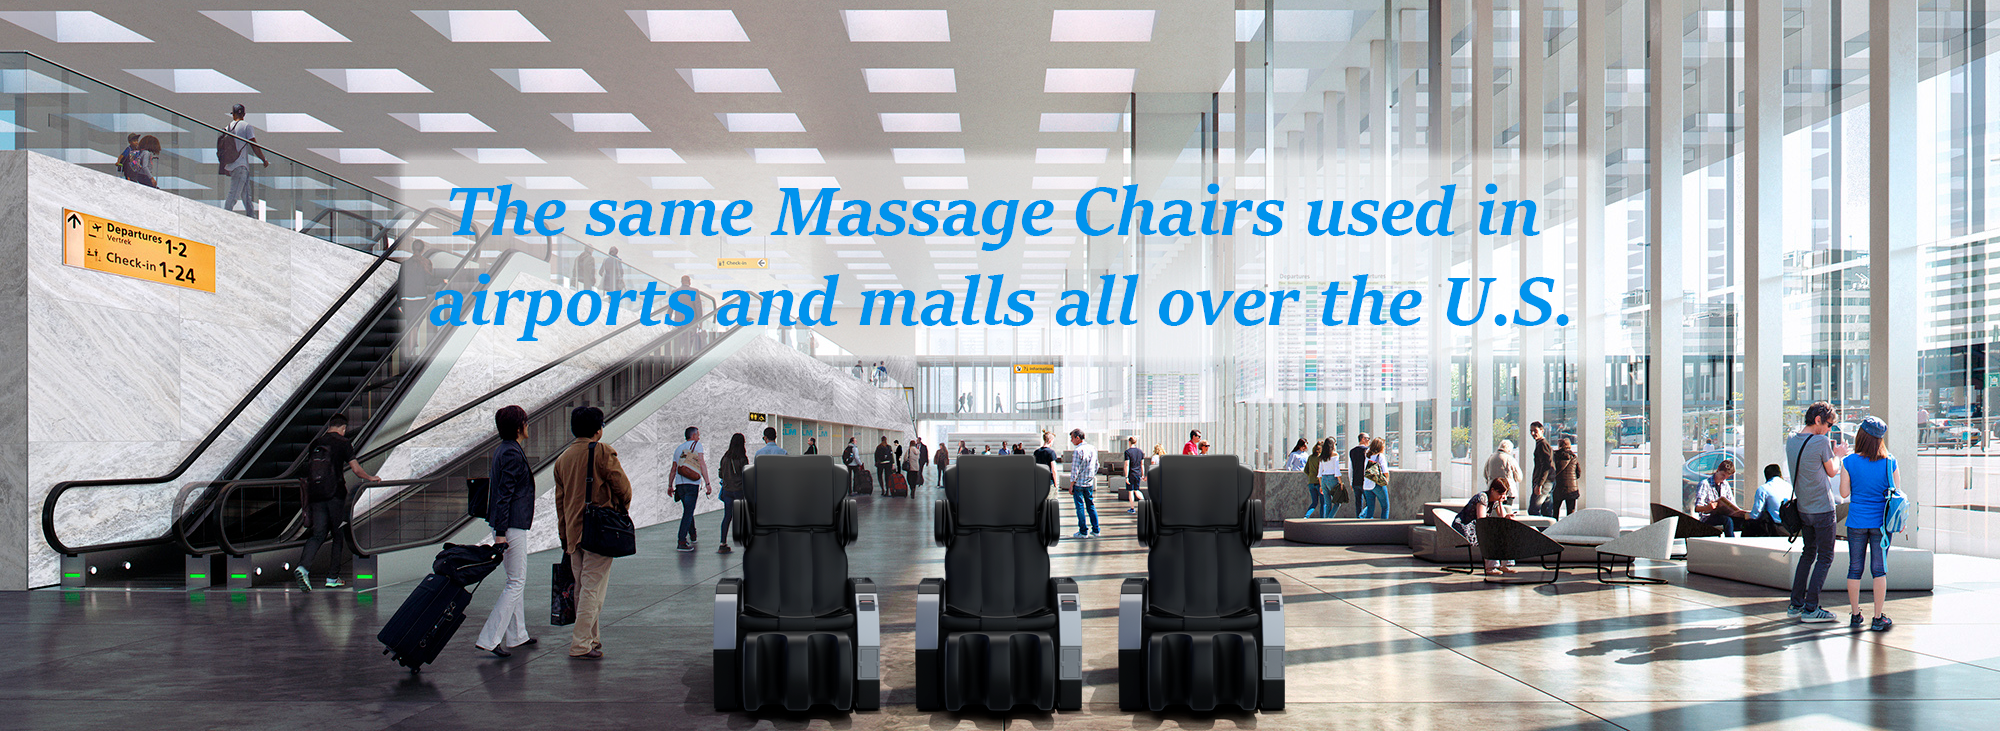 Medical Breakthrough's massage chairs used in airports and malls all over the U.S.